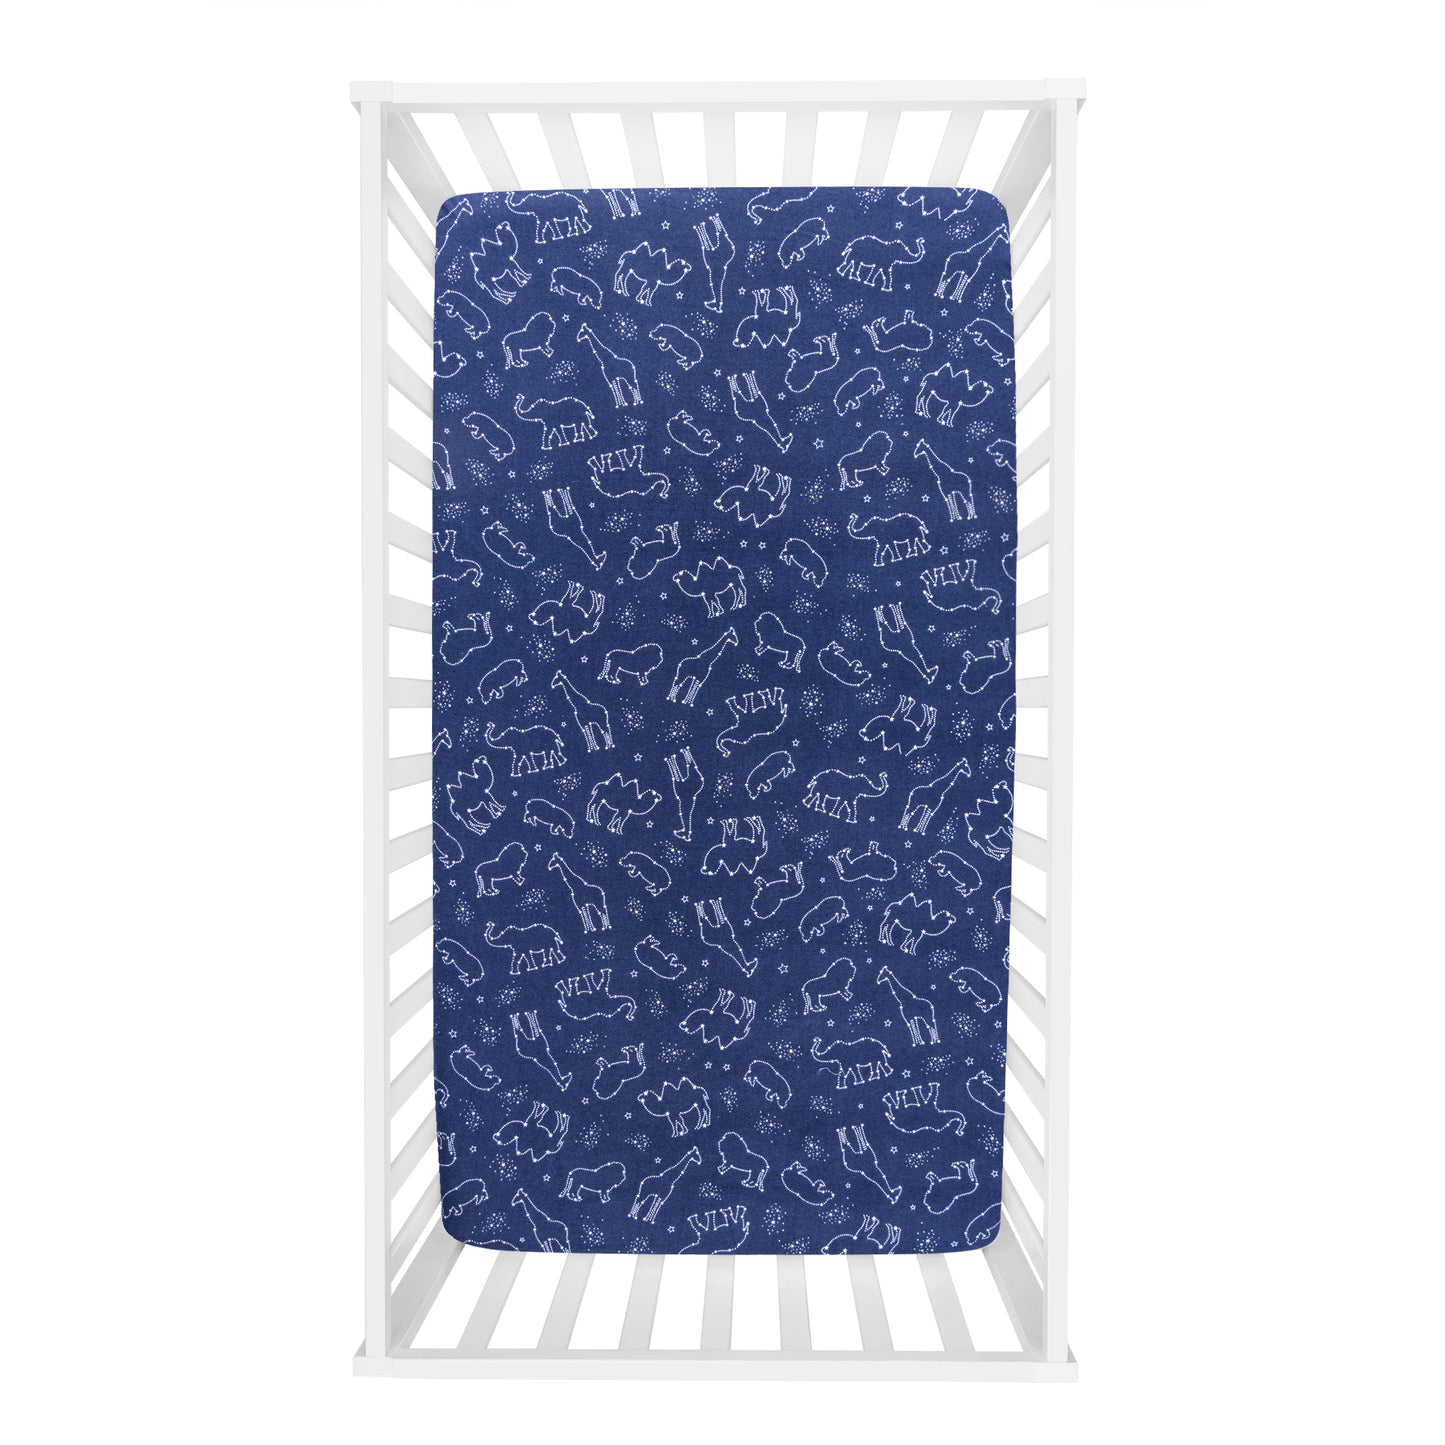 Starry Safari Deluxe Flannel Fitted Crib Sheet